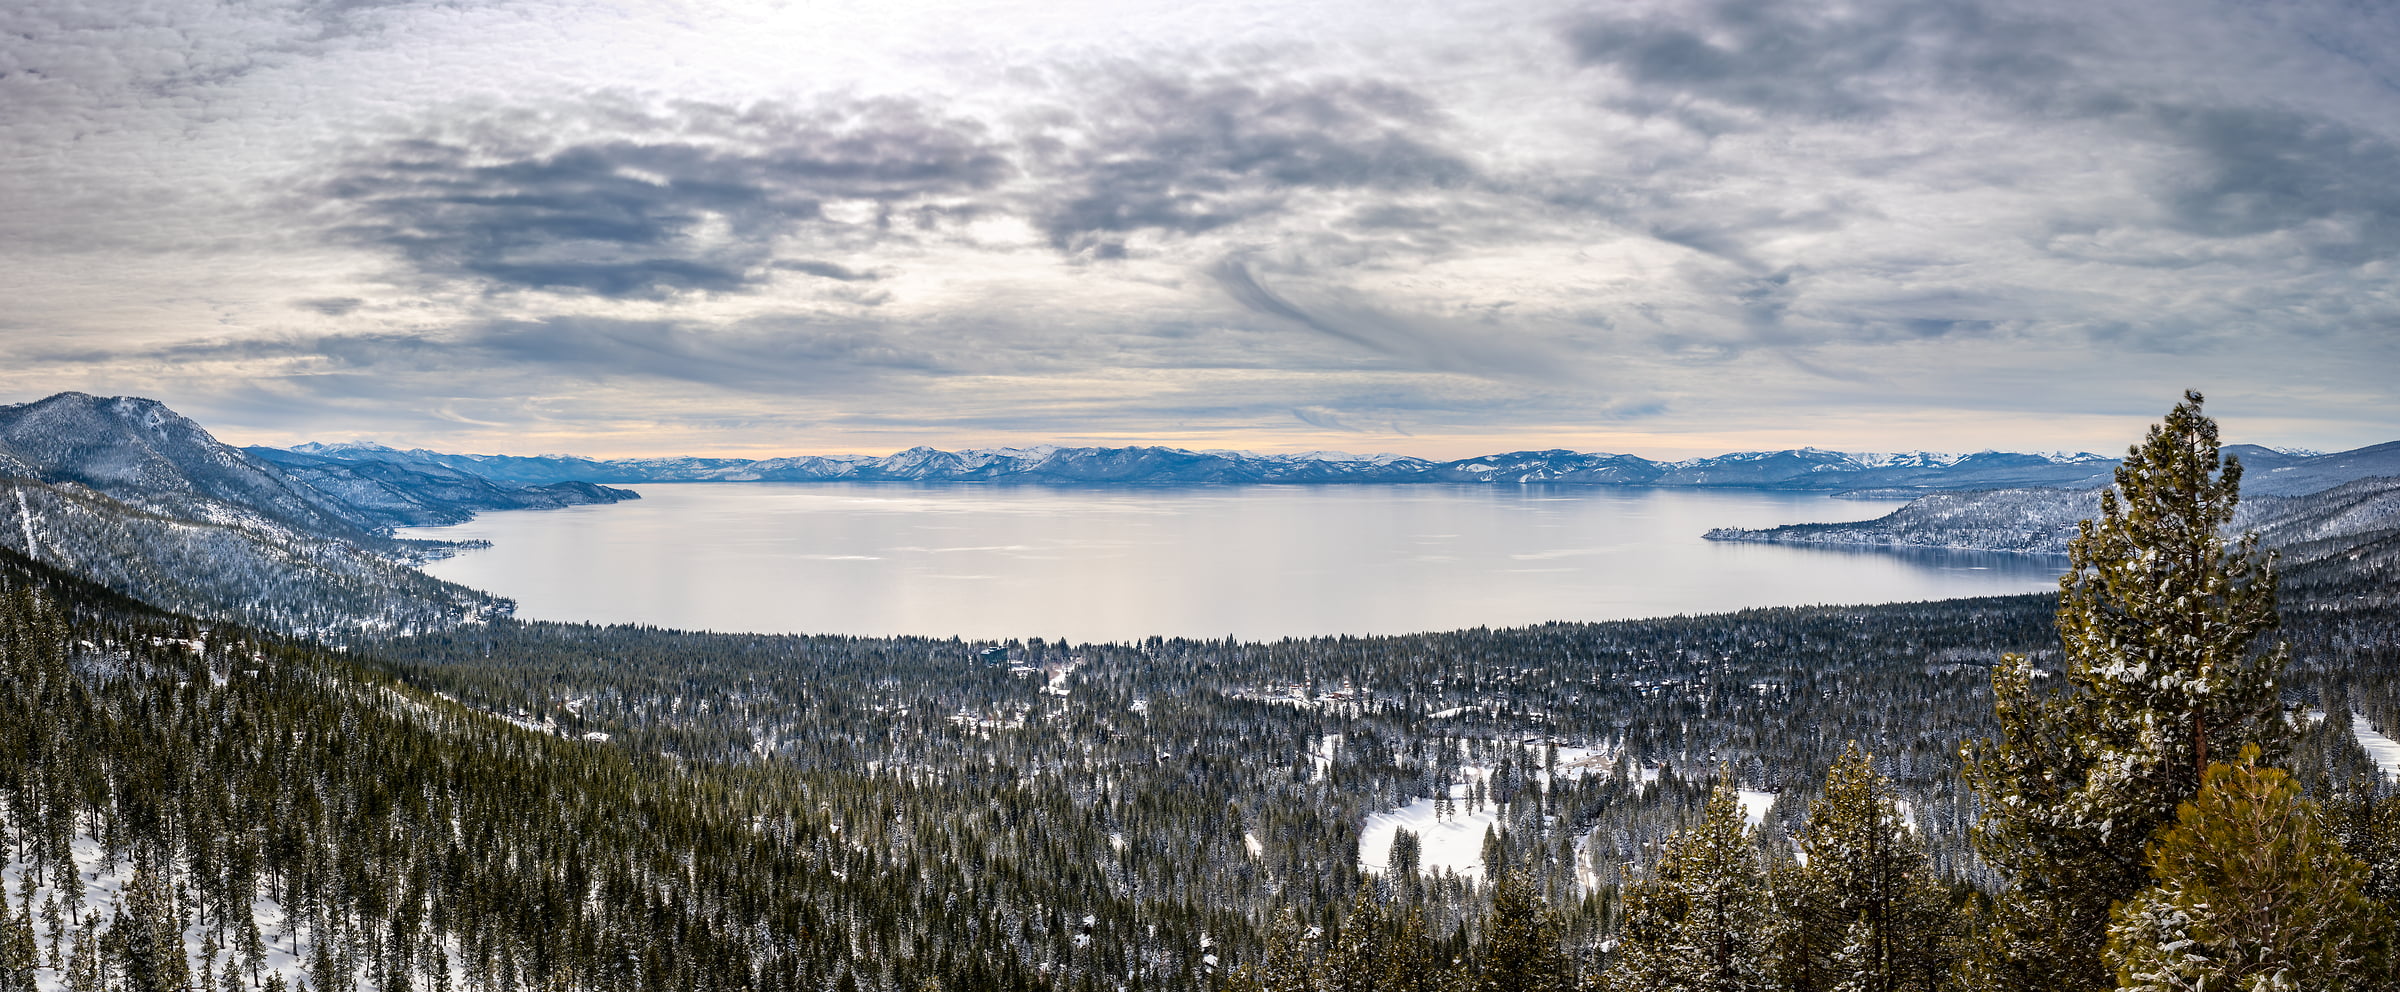 274 megapixels! A very high resolution, landscape photo of Lake Tahoe in winter; landscape photograph created by Justin Katz in Mount Rose Highway, Lake Tahoe, Nevada